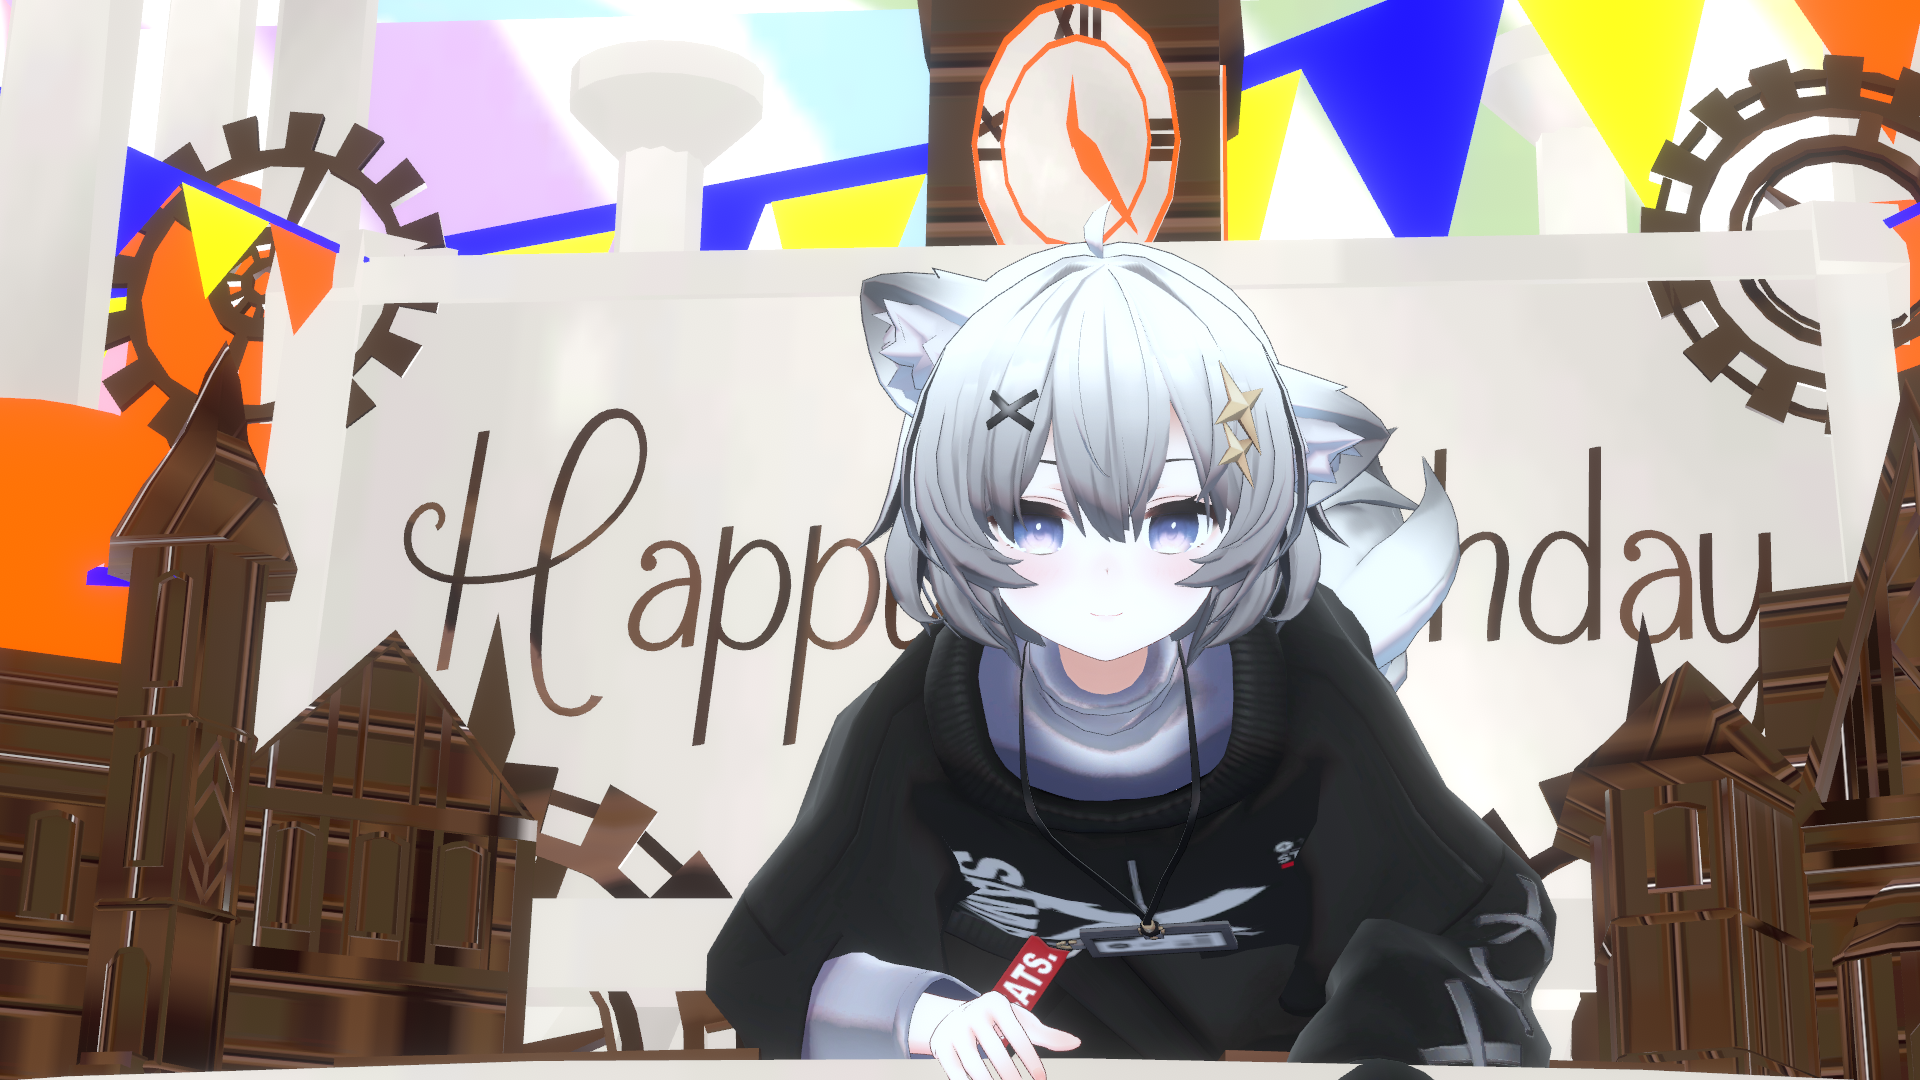 VRChat_1920x1080_2021-12-05_04-02-37.488.png